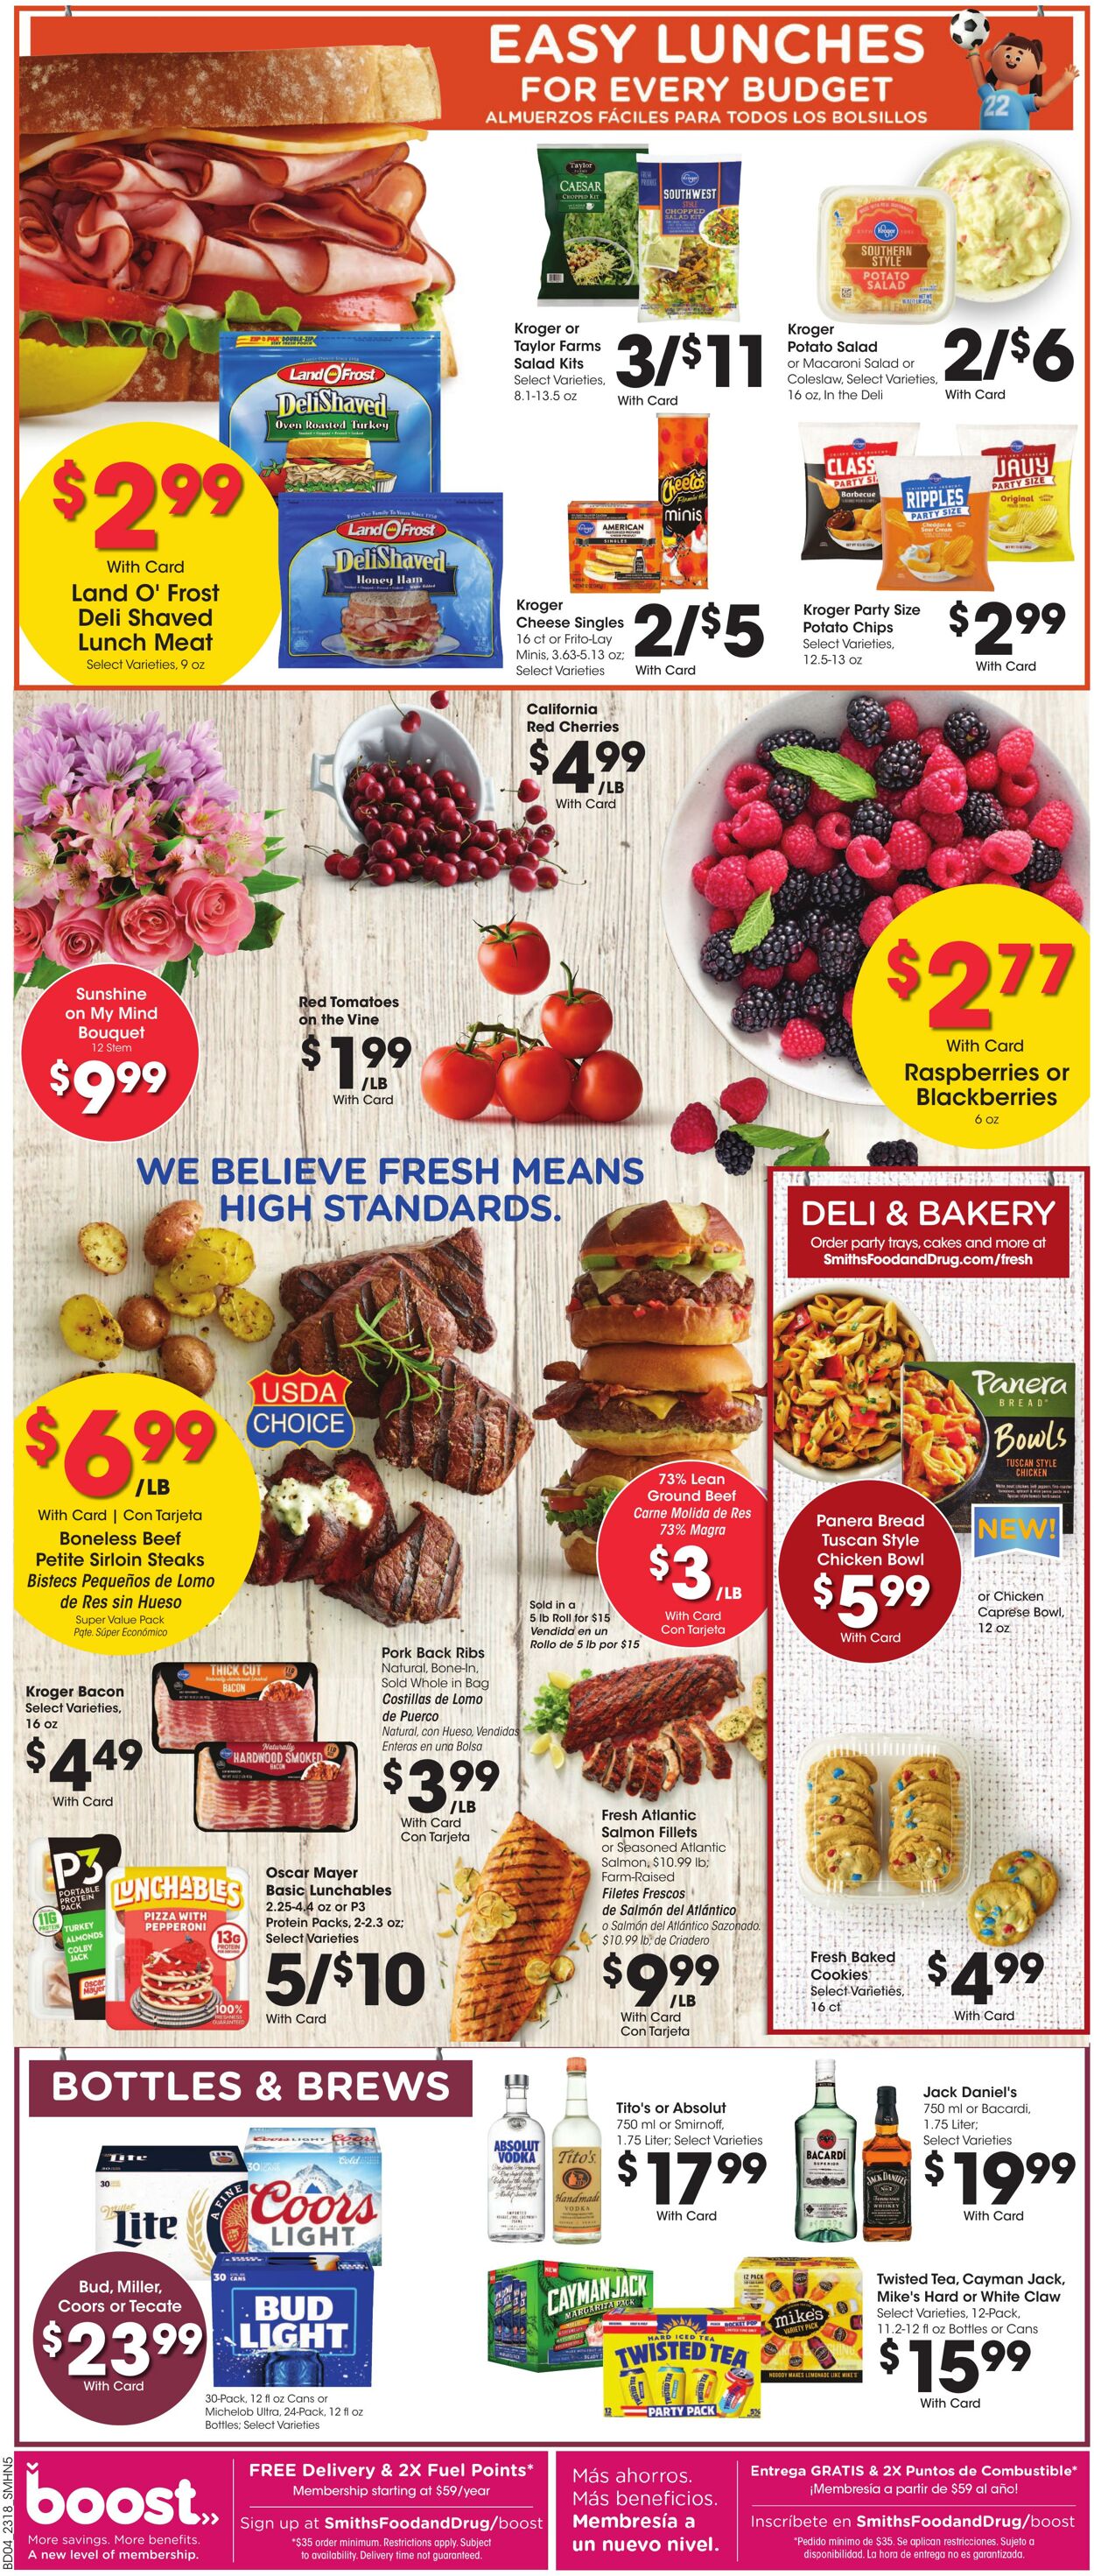 Weekly ad Smith’s Food and Drug 05/31/2023 - 06/06/2023